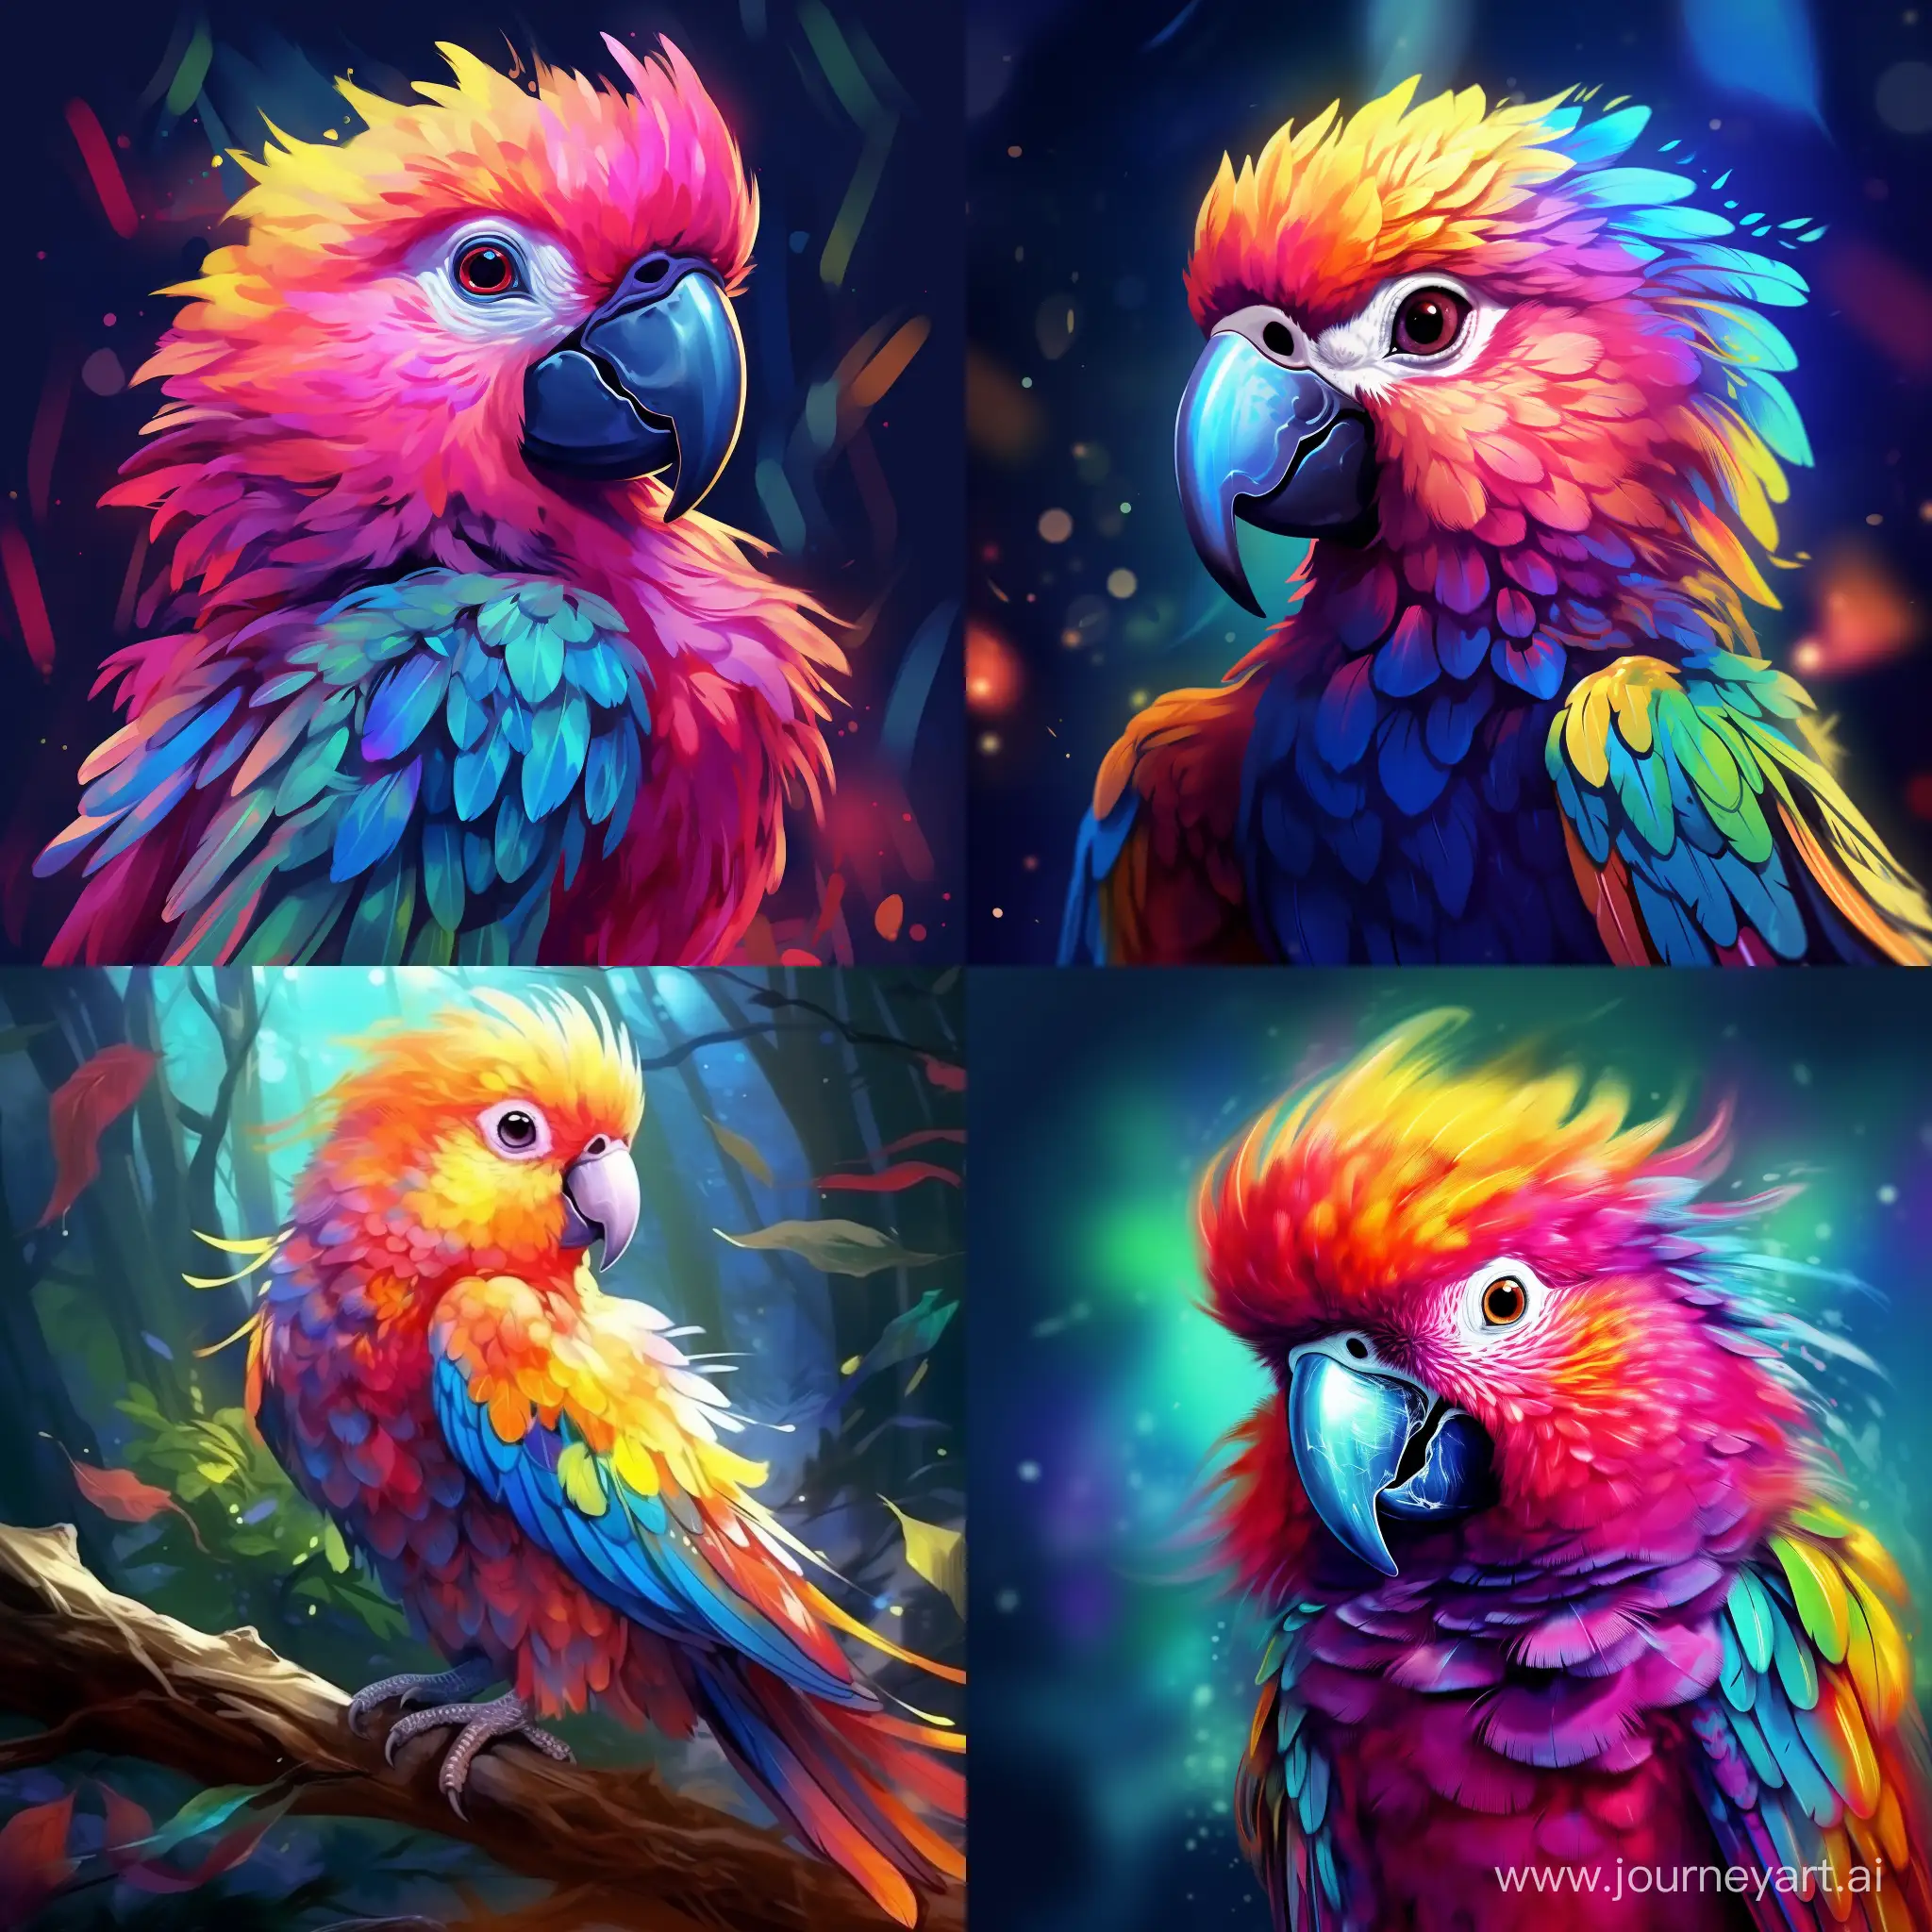 Vibrant-11-Aspect-Ratio-Image-of-a-Cute-and-Colorful-Parrot-No-10709